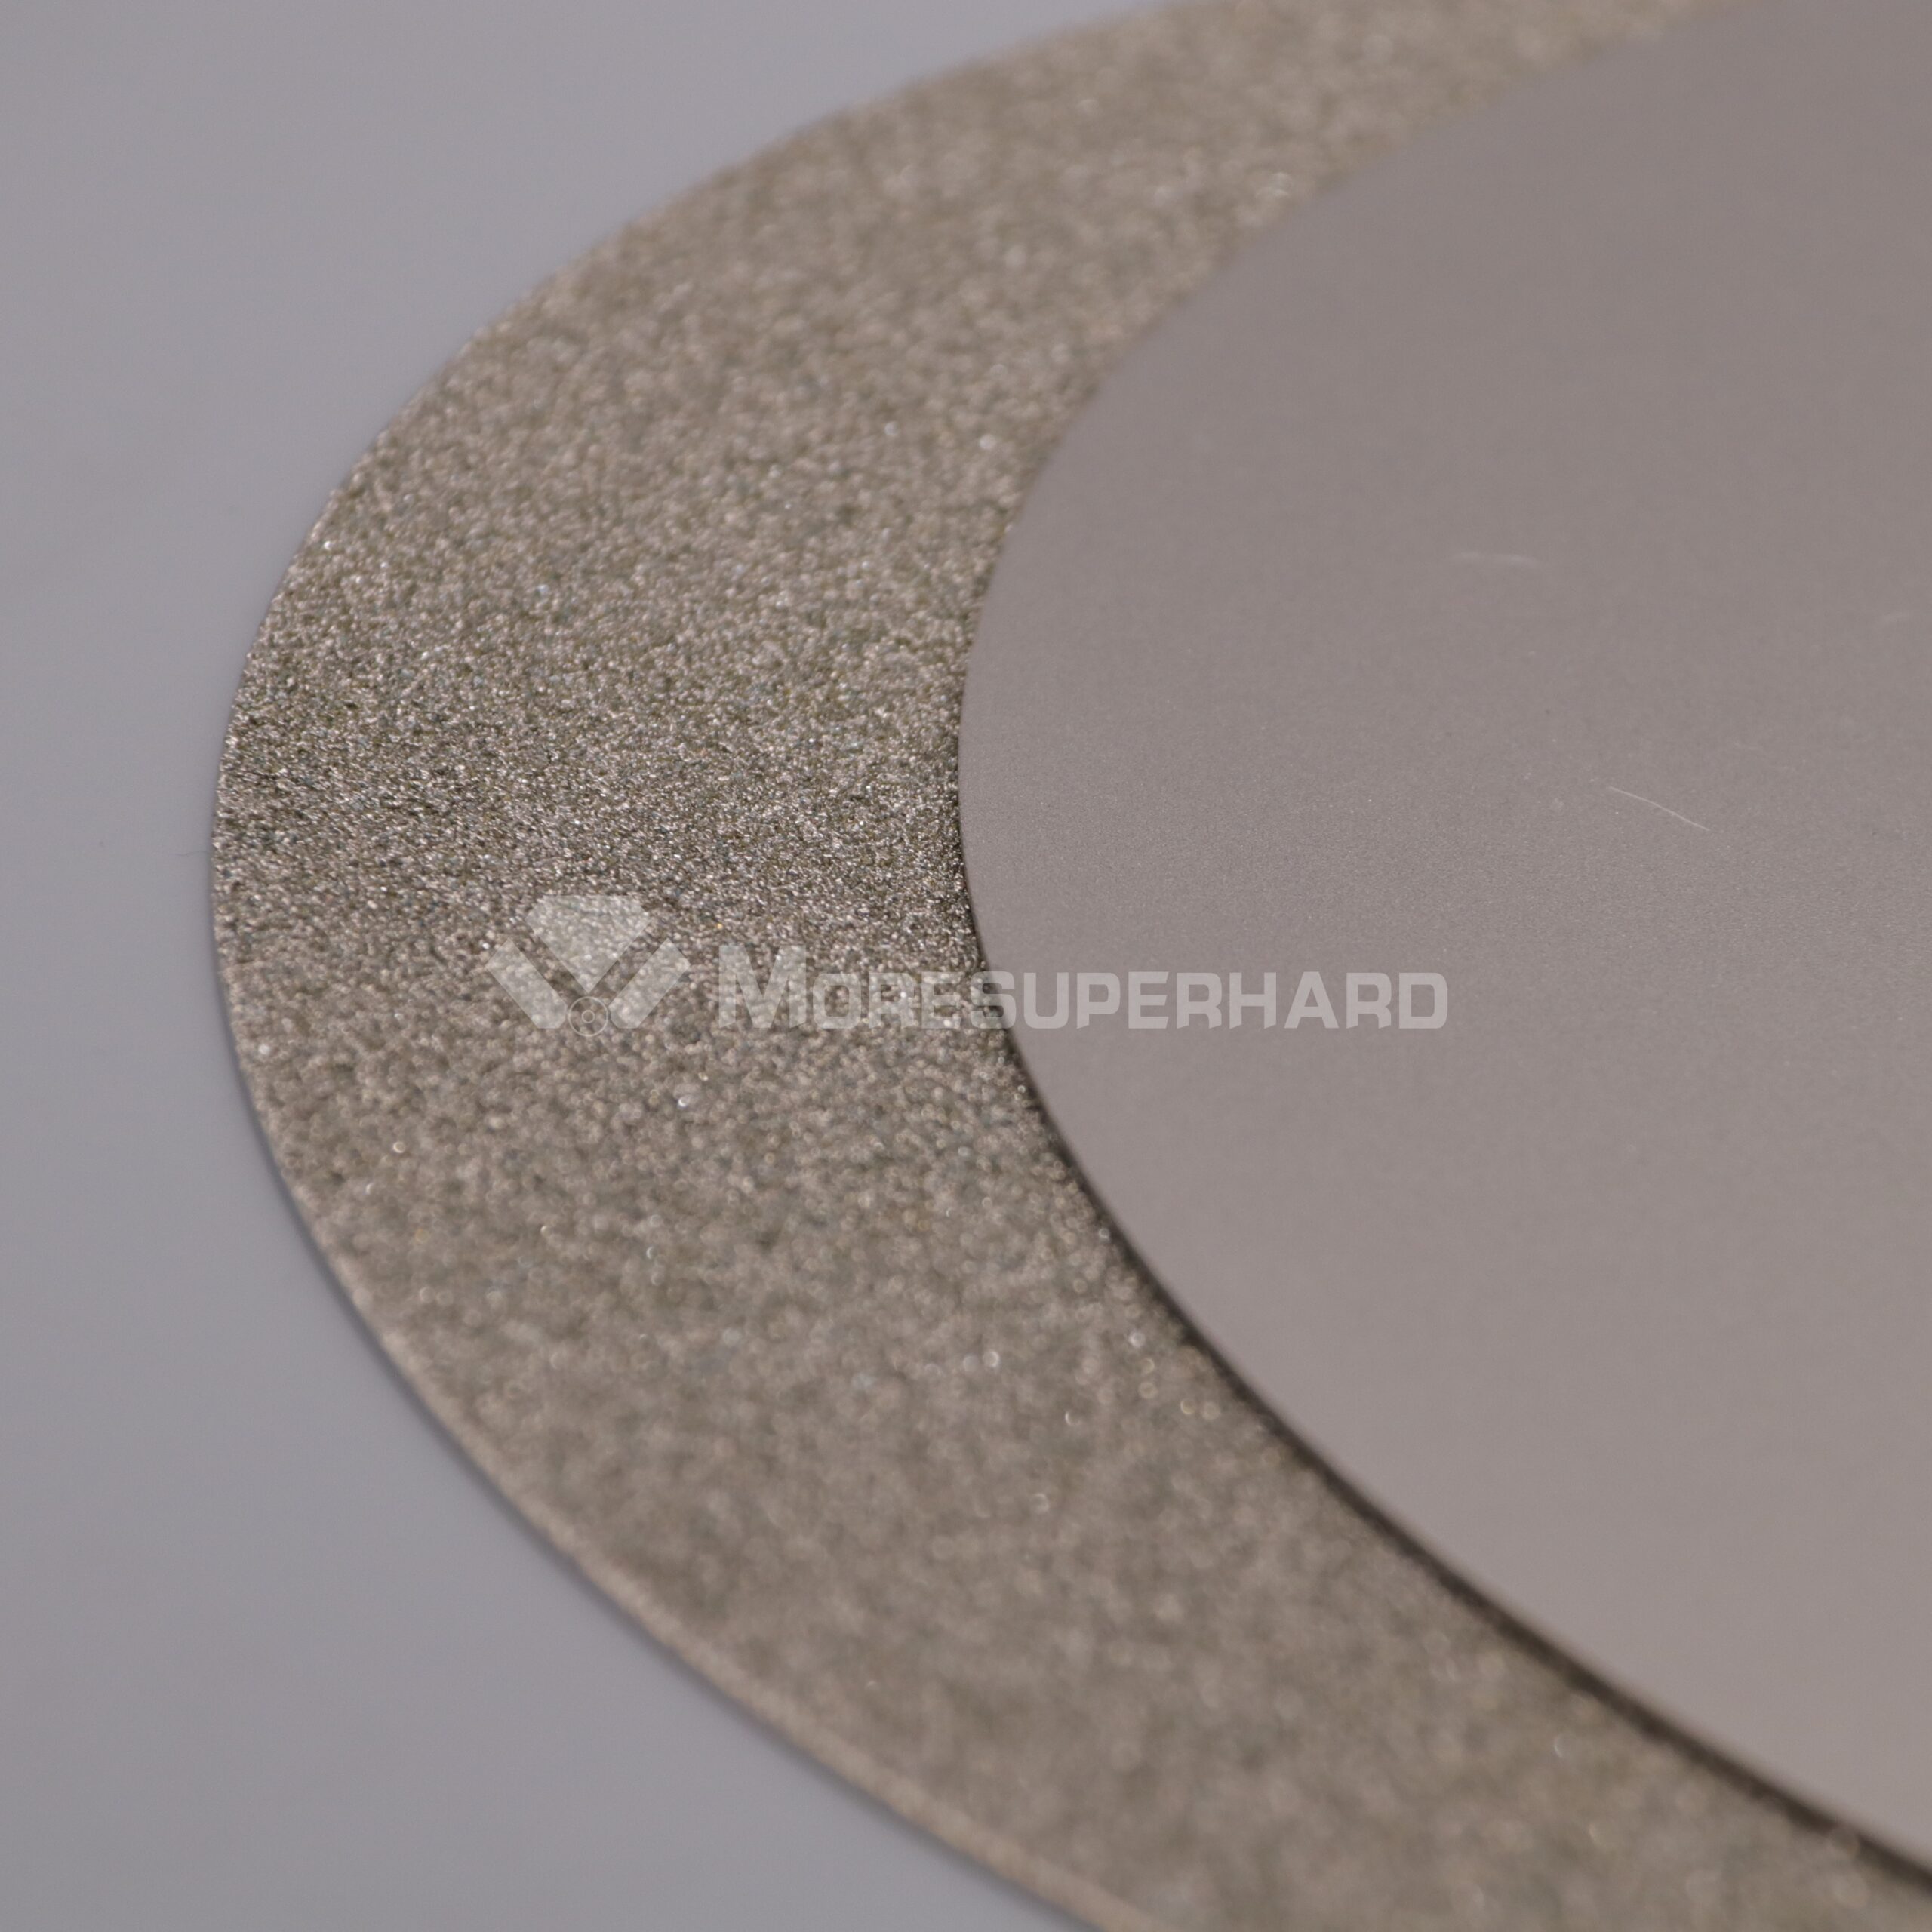 Gemstone Grinding with Moresuperhard’s Lapping Discs